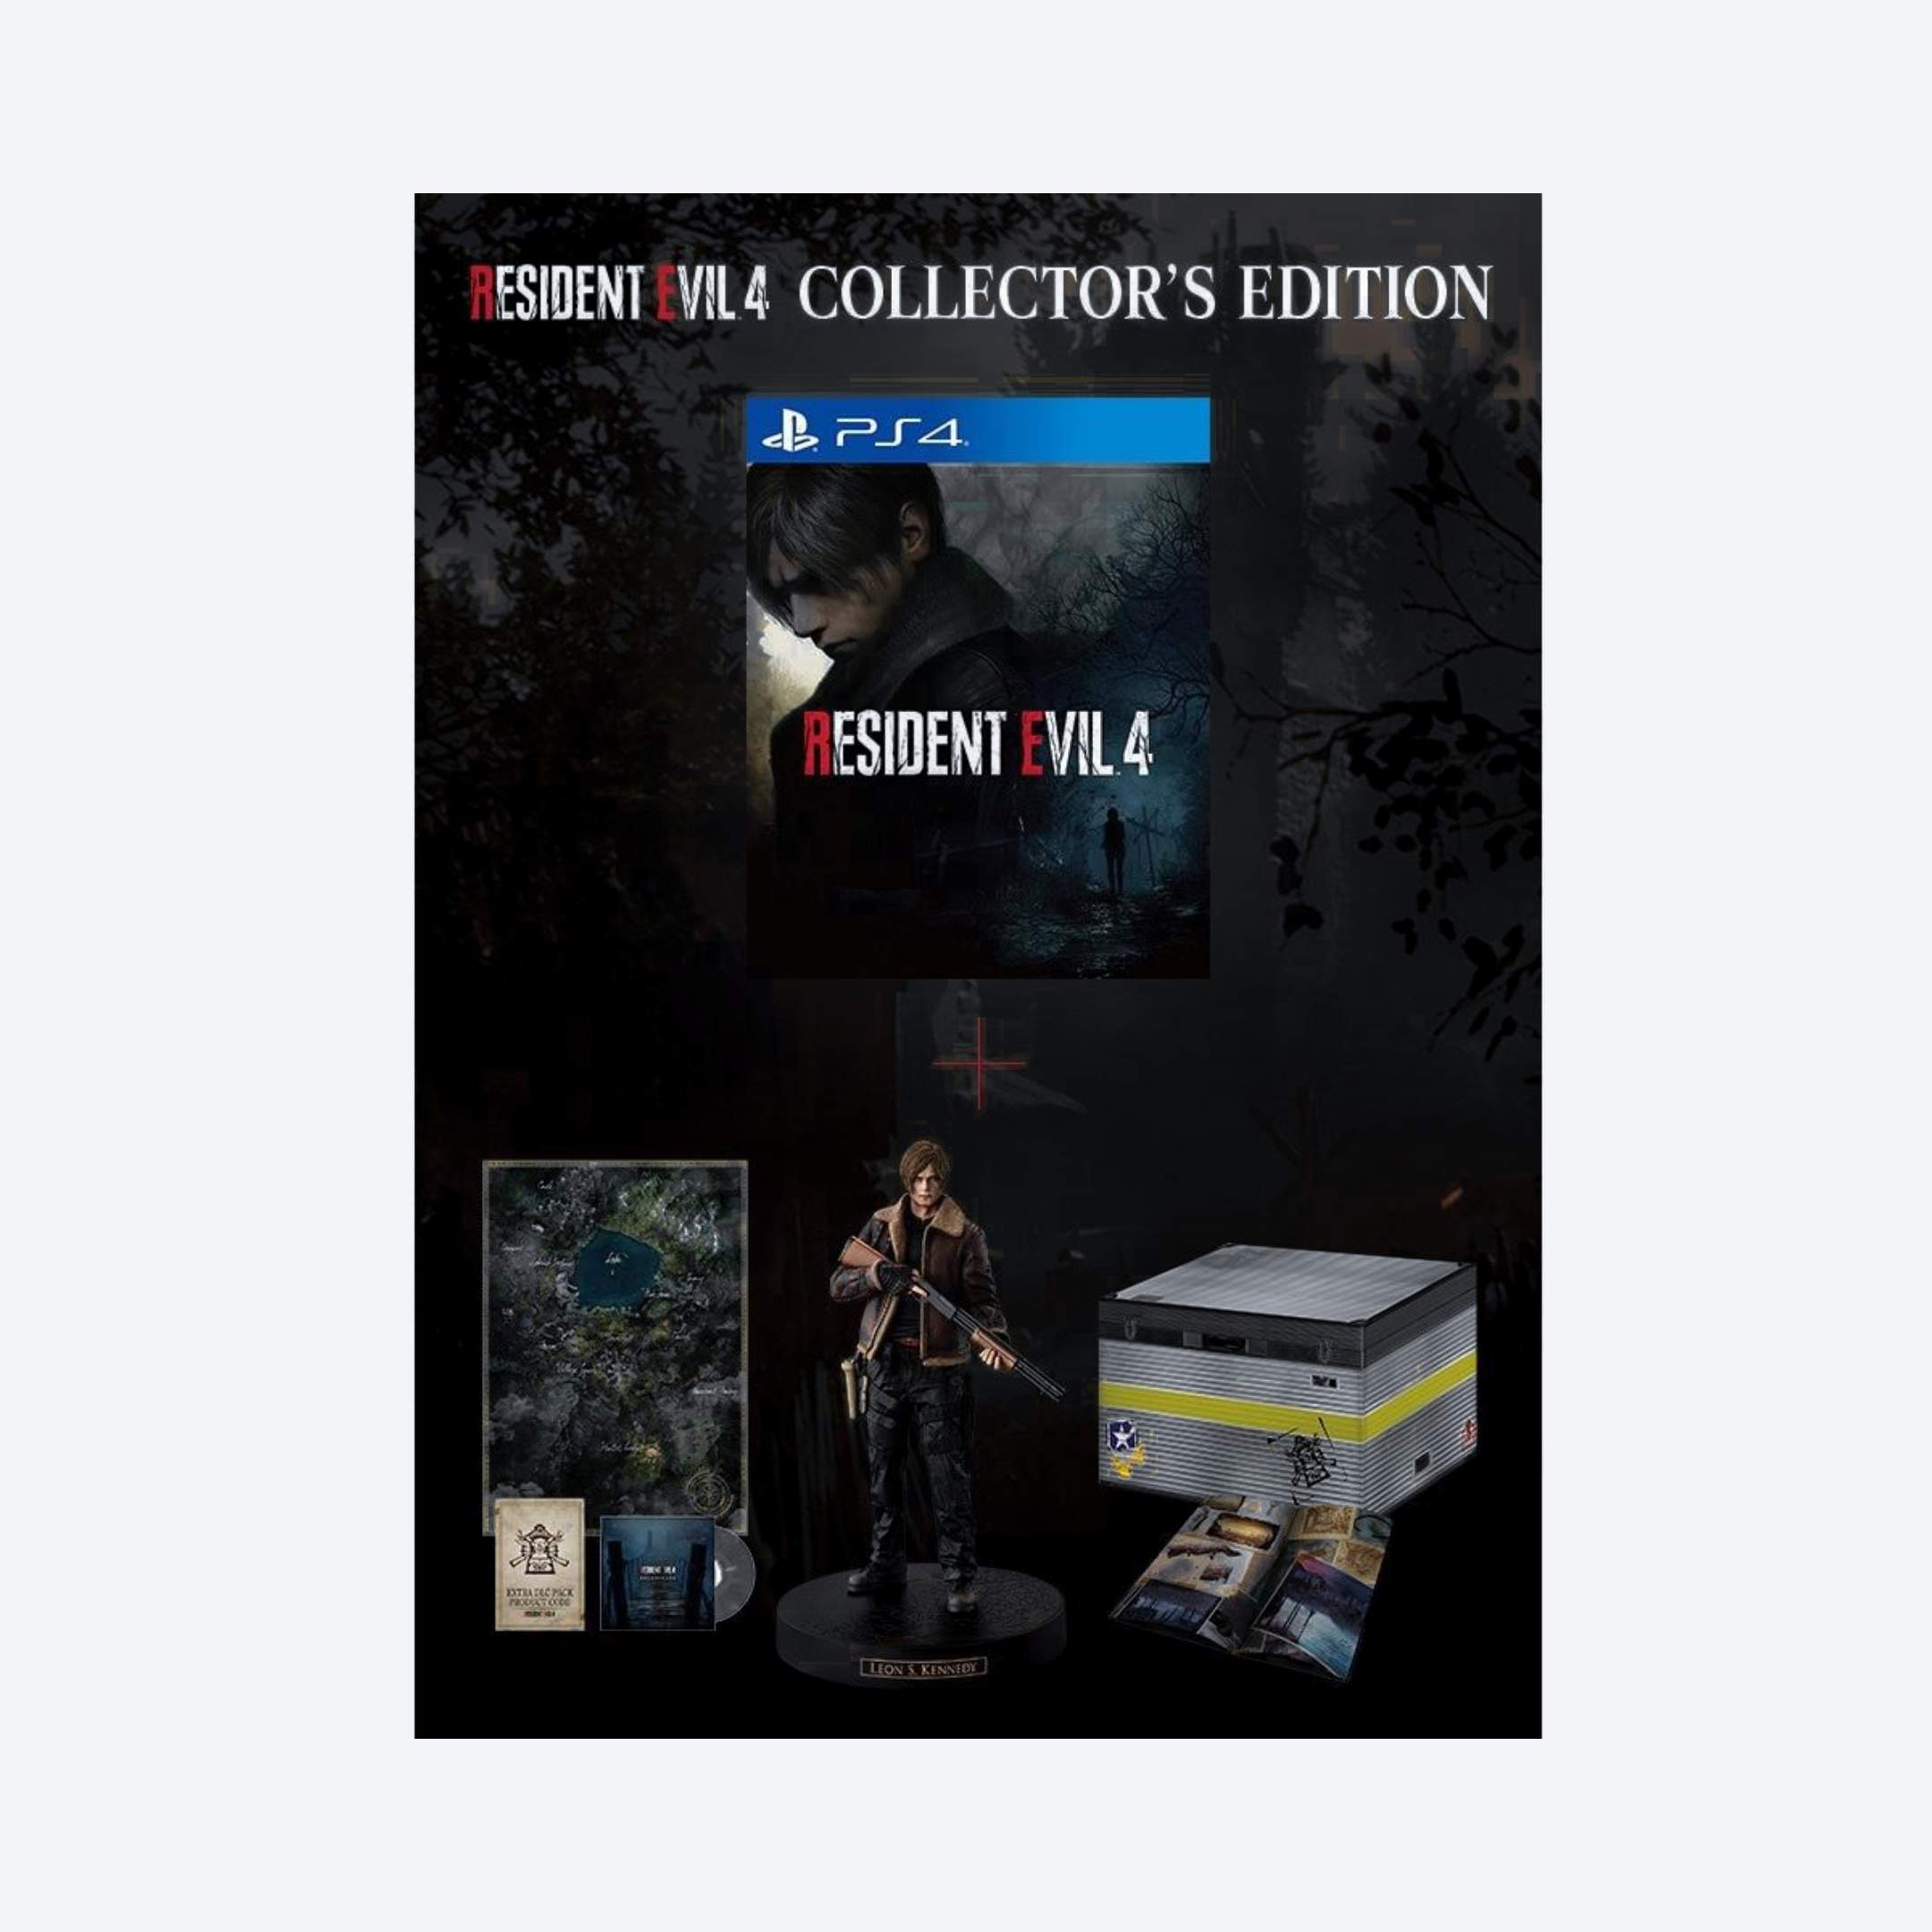 Resident Evil 4 Remake Collector's Edition: What's Included?